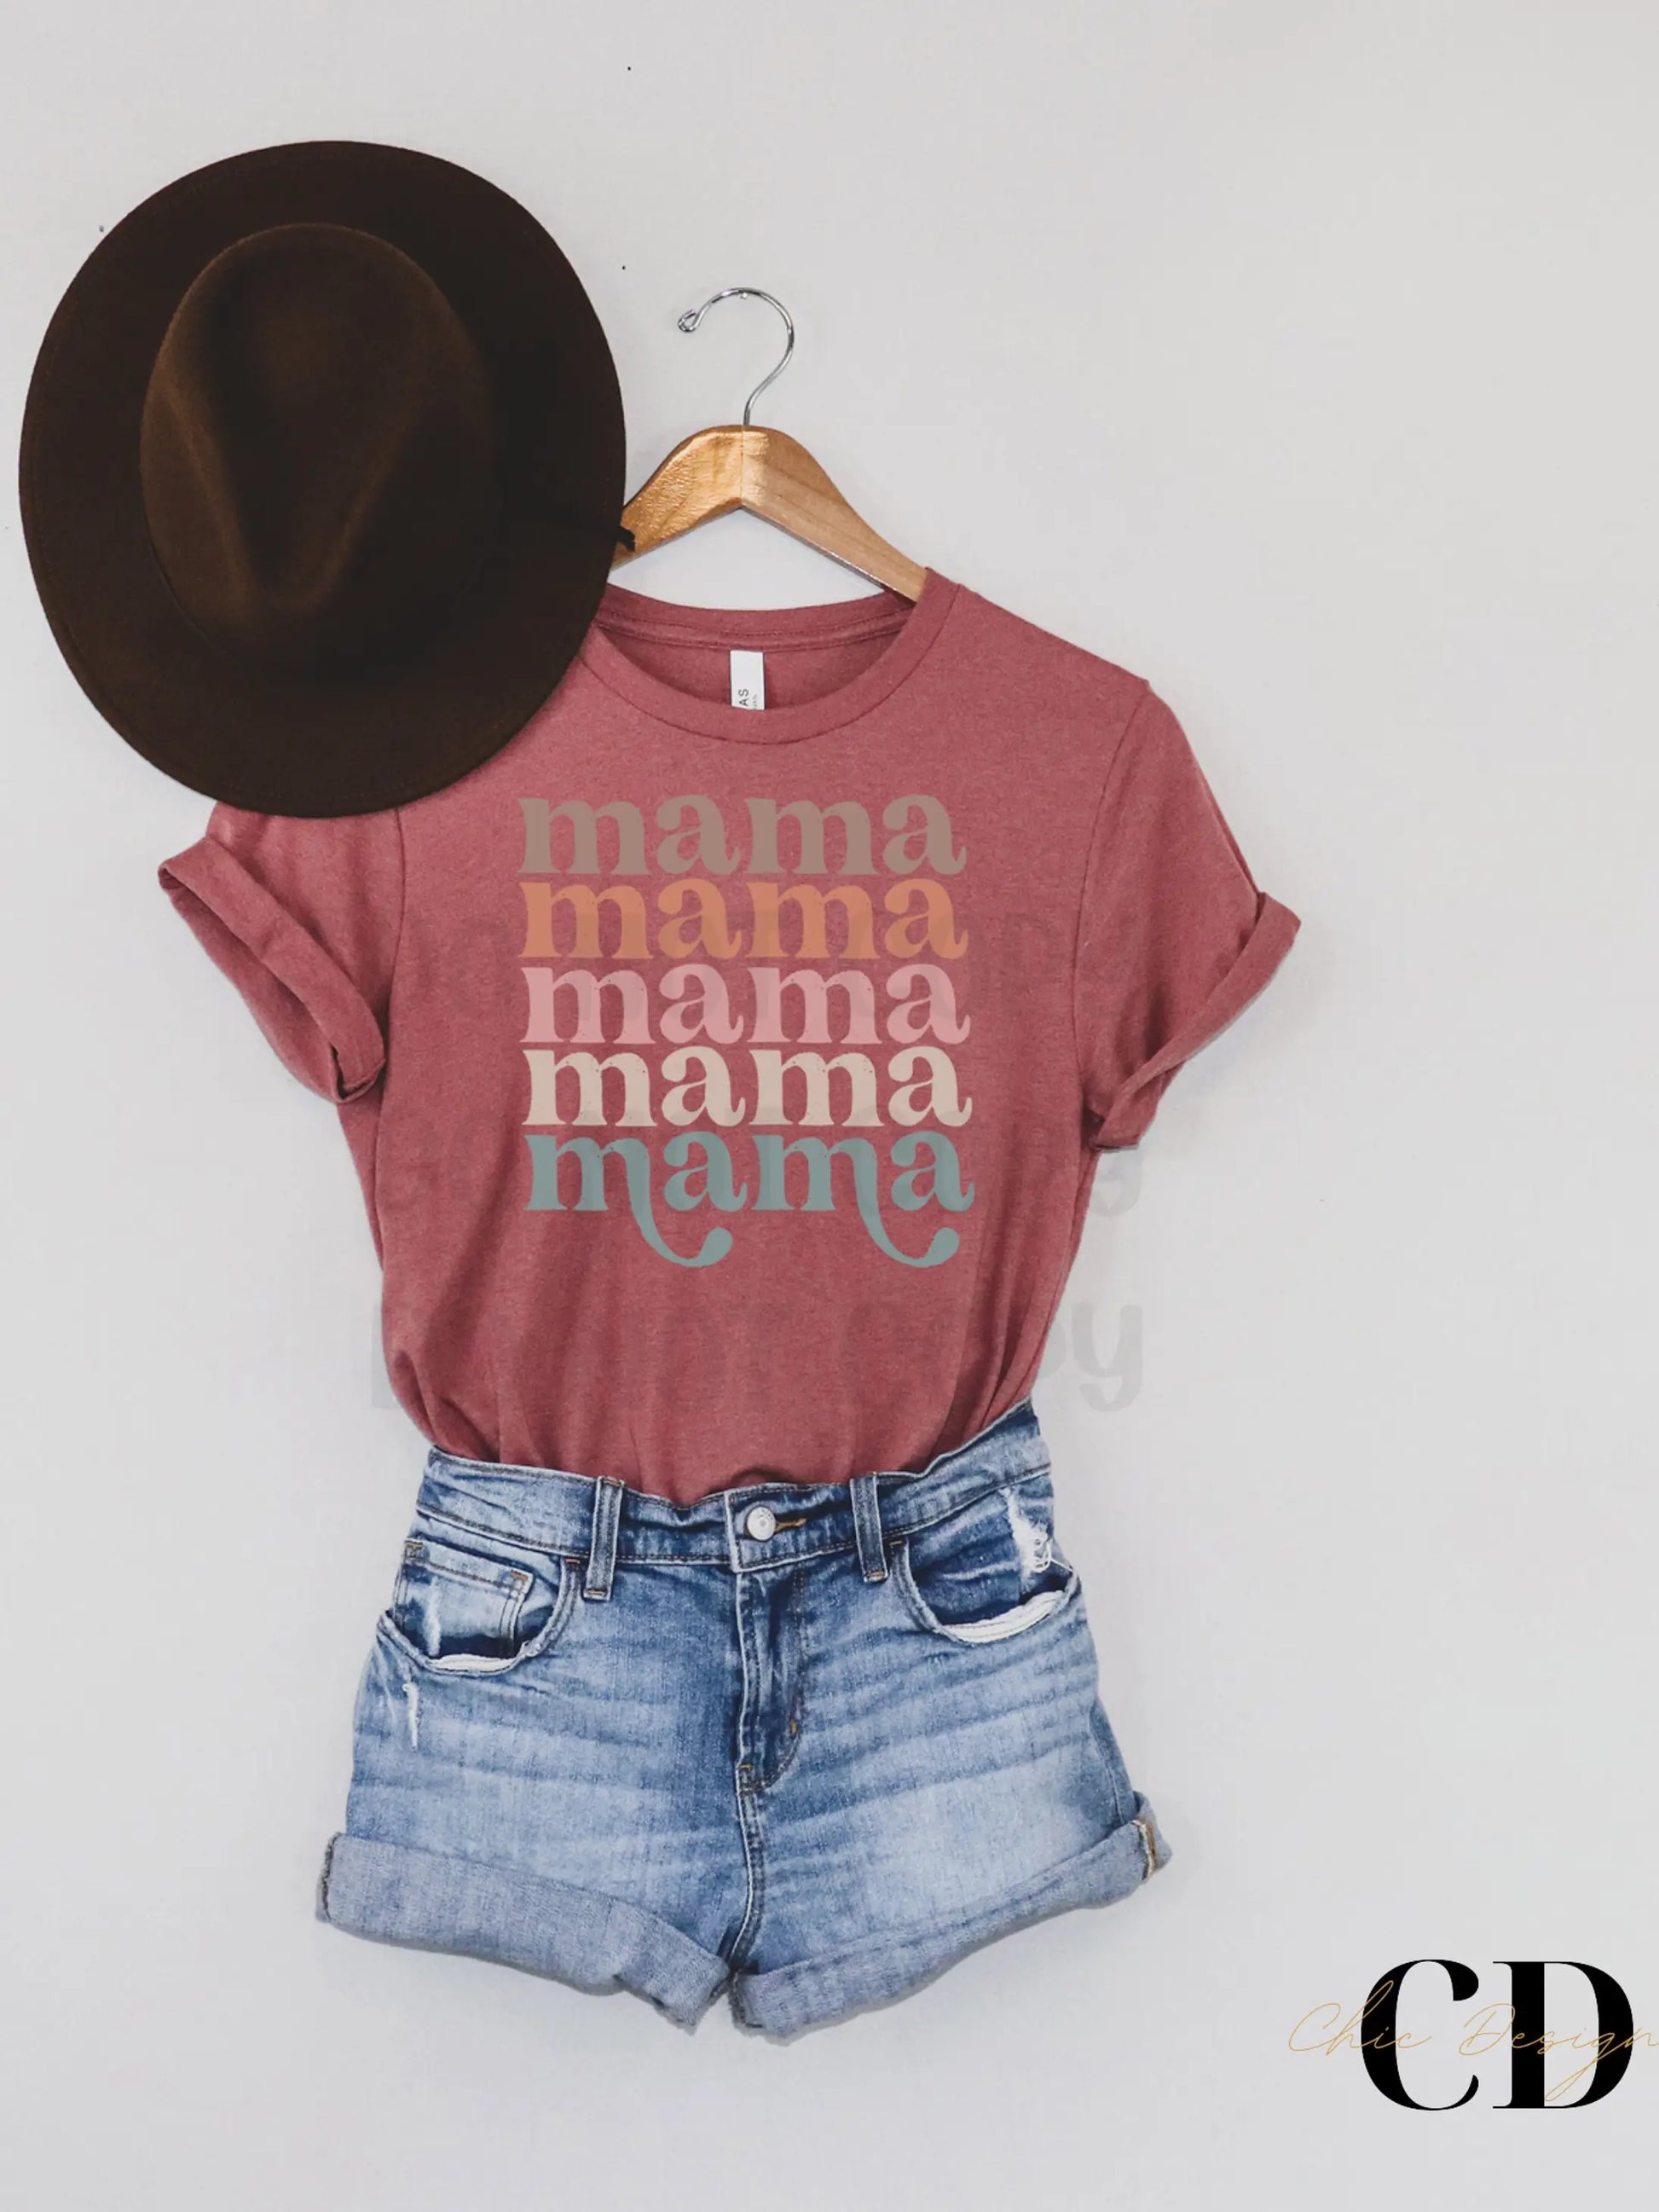 Mama Repeat Tee  - Doodlebug's Children's Boutique